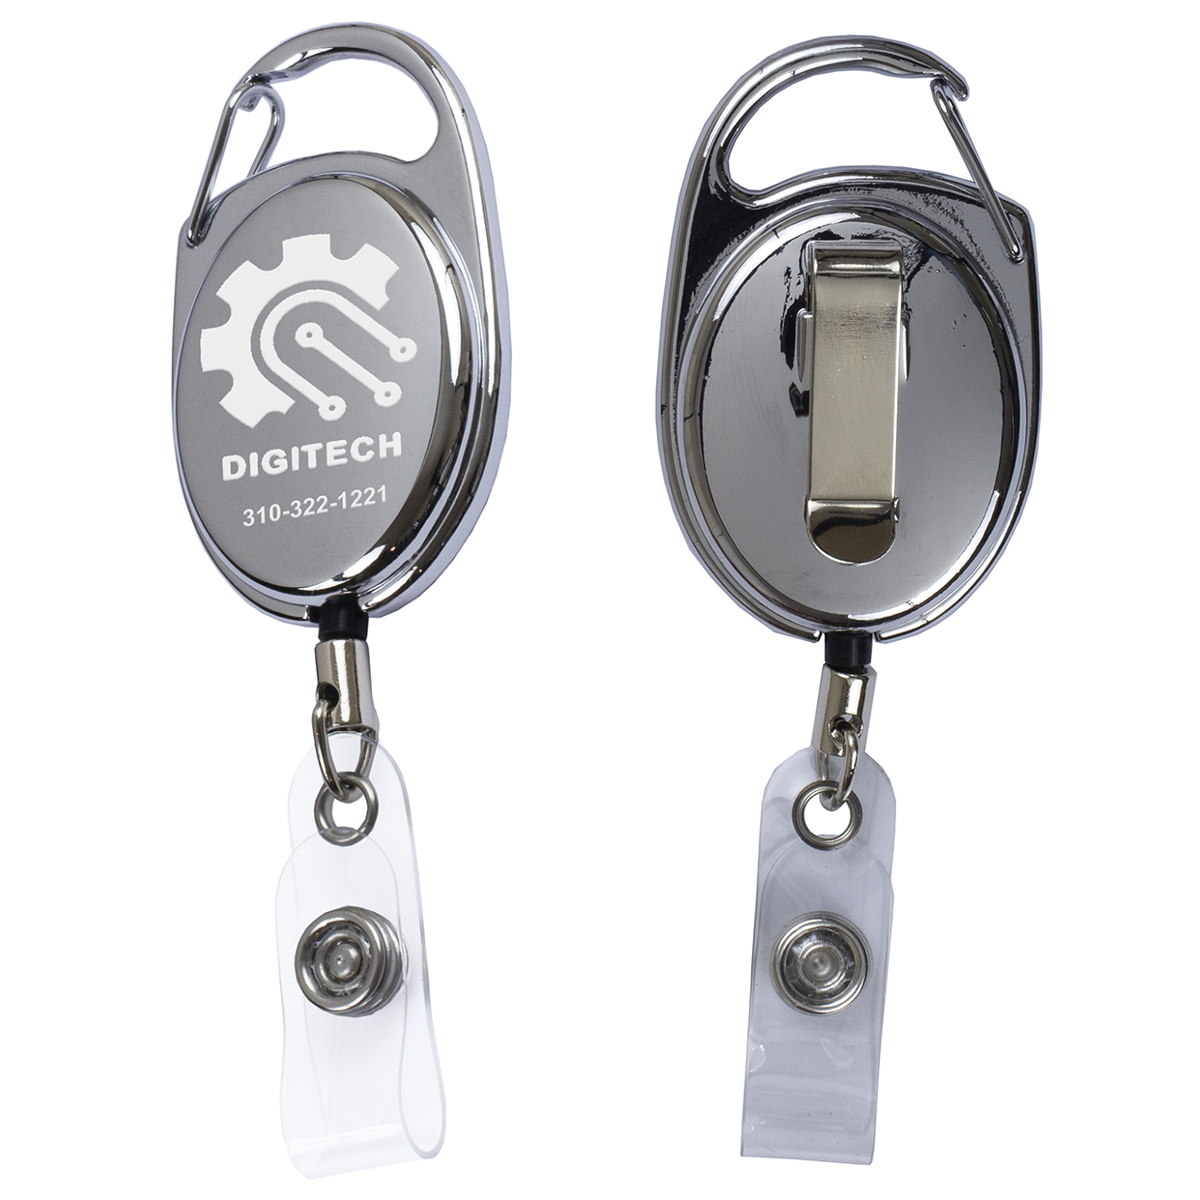 "Pataskala" 30” Cord Shiny Chrome Finish Solid Metal Retractable Badge Reel and Badge Holder with Laser Imprint (Patent D539,122)